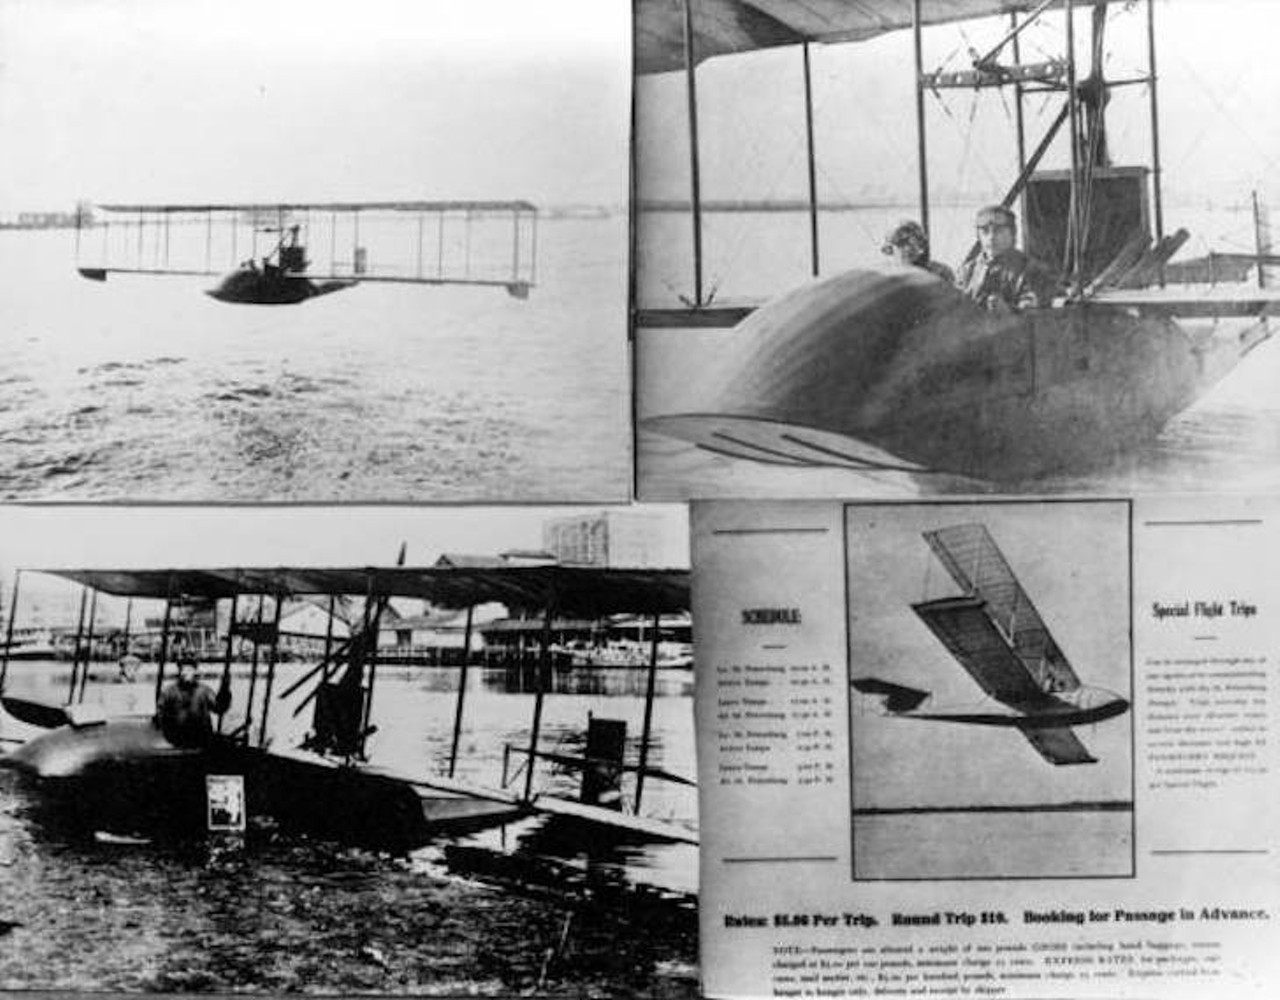 The world&#146;s first scheduled passenger flight flew from St. Pete to Tampa in 1914  
Tired of driving across the Howard Franklin and the Gandy? Yeah, we are too. But in 1914 the world&#146;s first scheduled passenger flight made the trip, flown by Tony Jannus. Tickets were only $5, too. So you can think about that when you&#146;re sitting on I-275 during rush hour. 
Photo via Florida State Archives